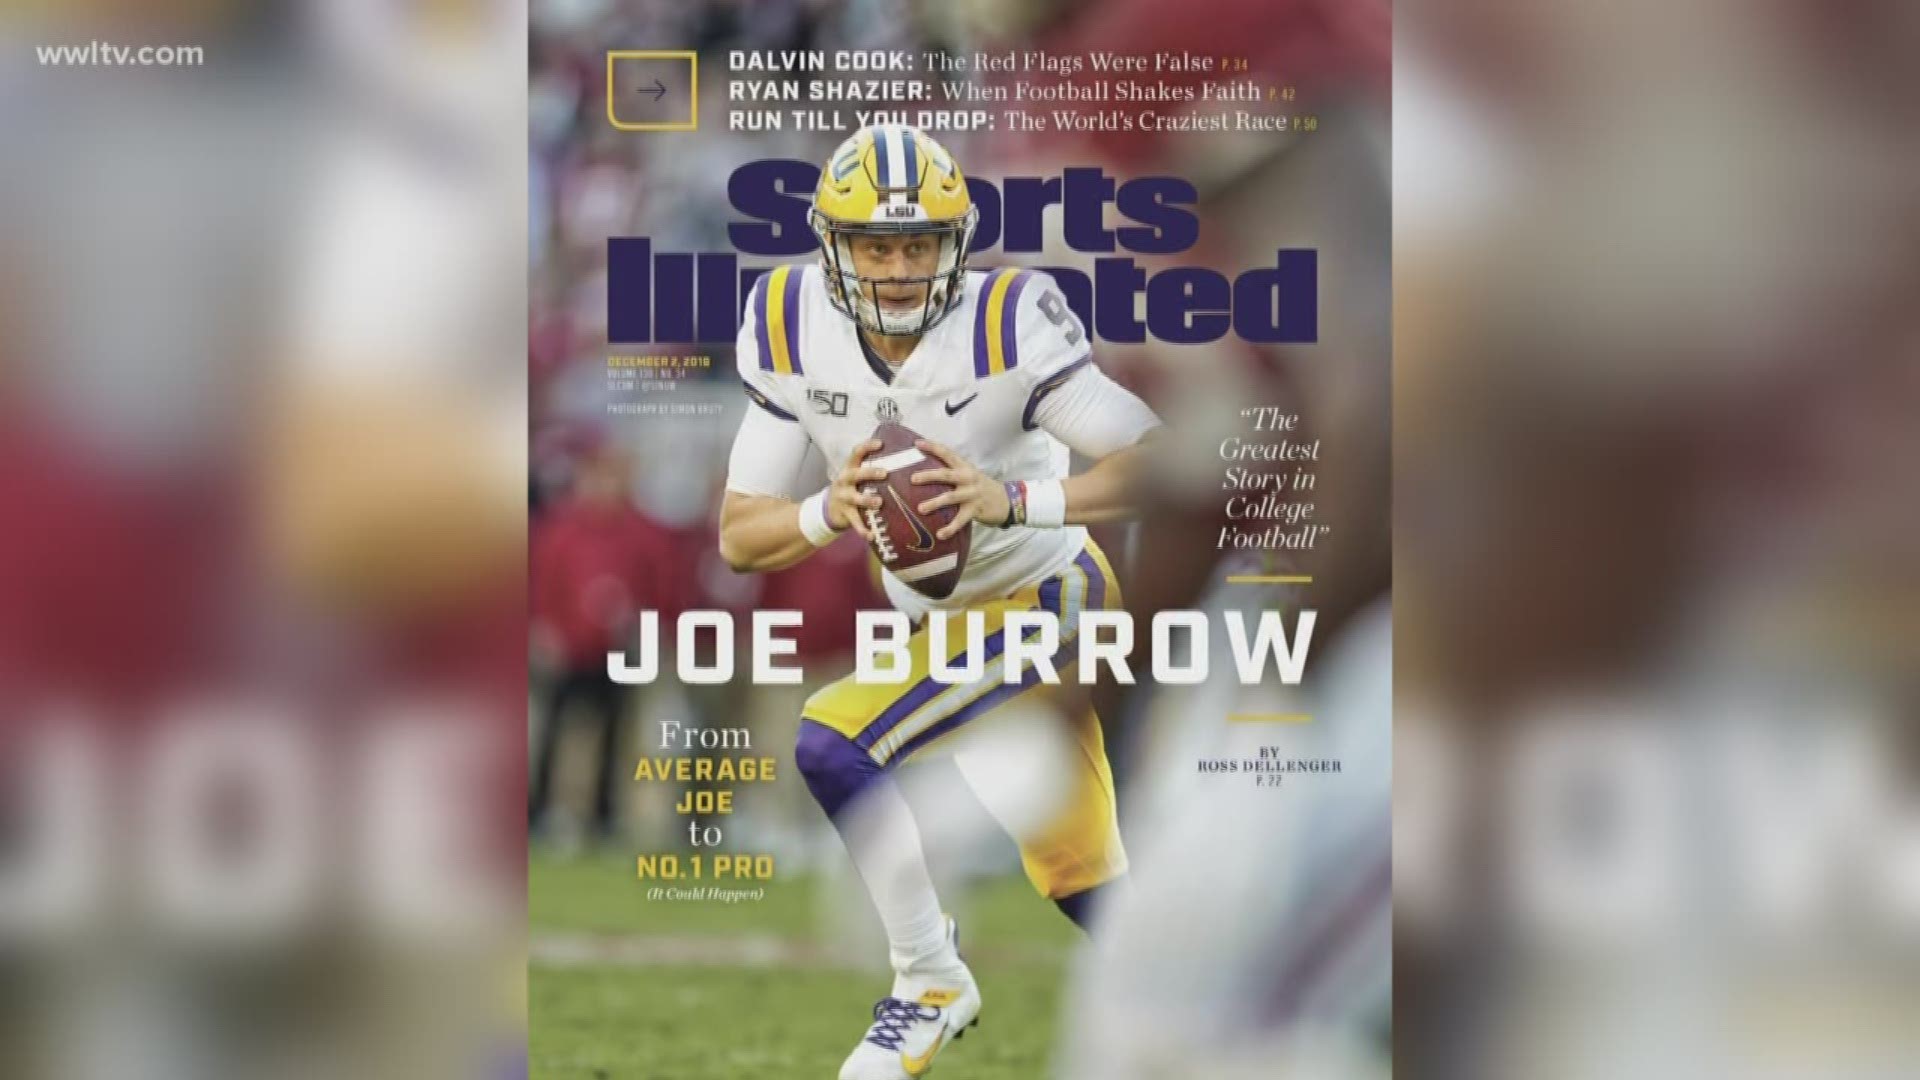 Joe Burrow doesn't have all the answers, but he's close - Sports Illustrated